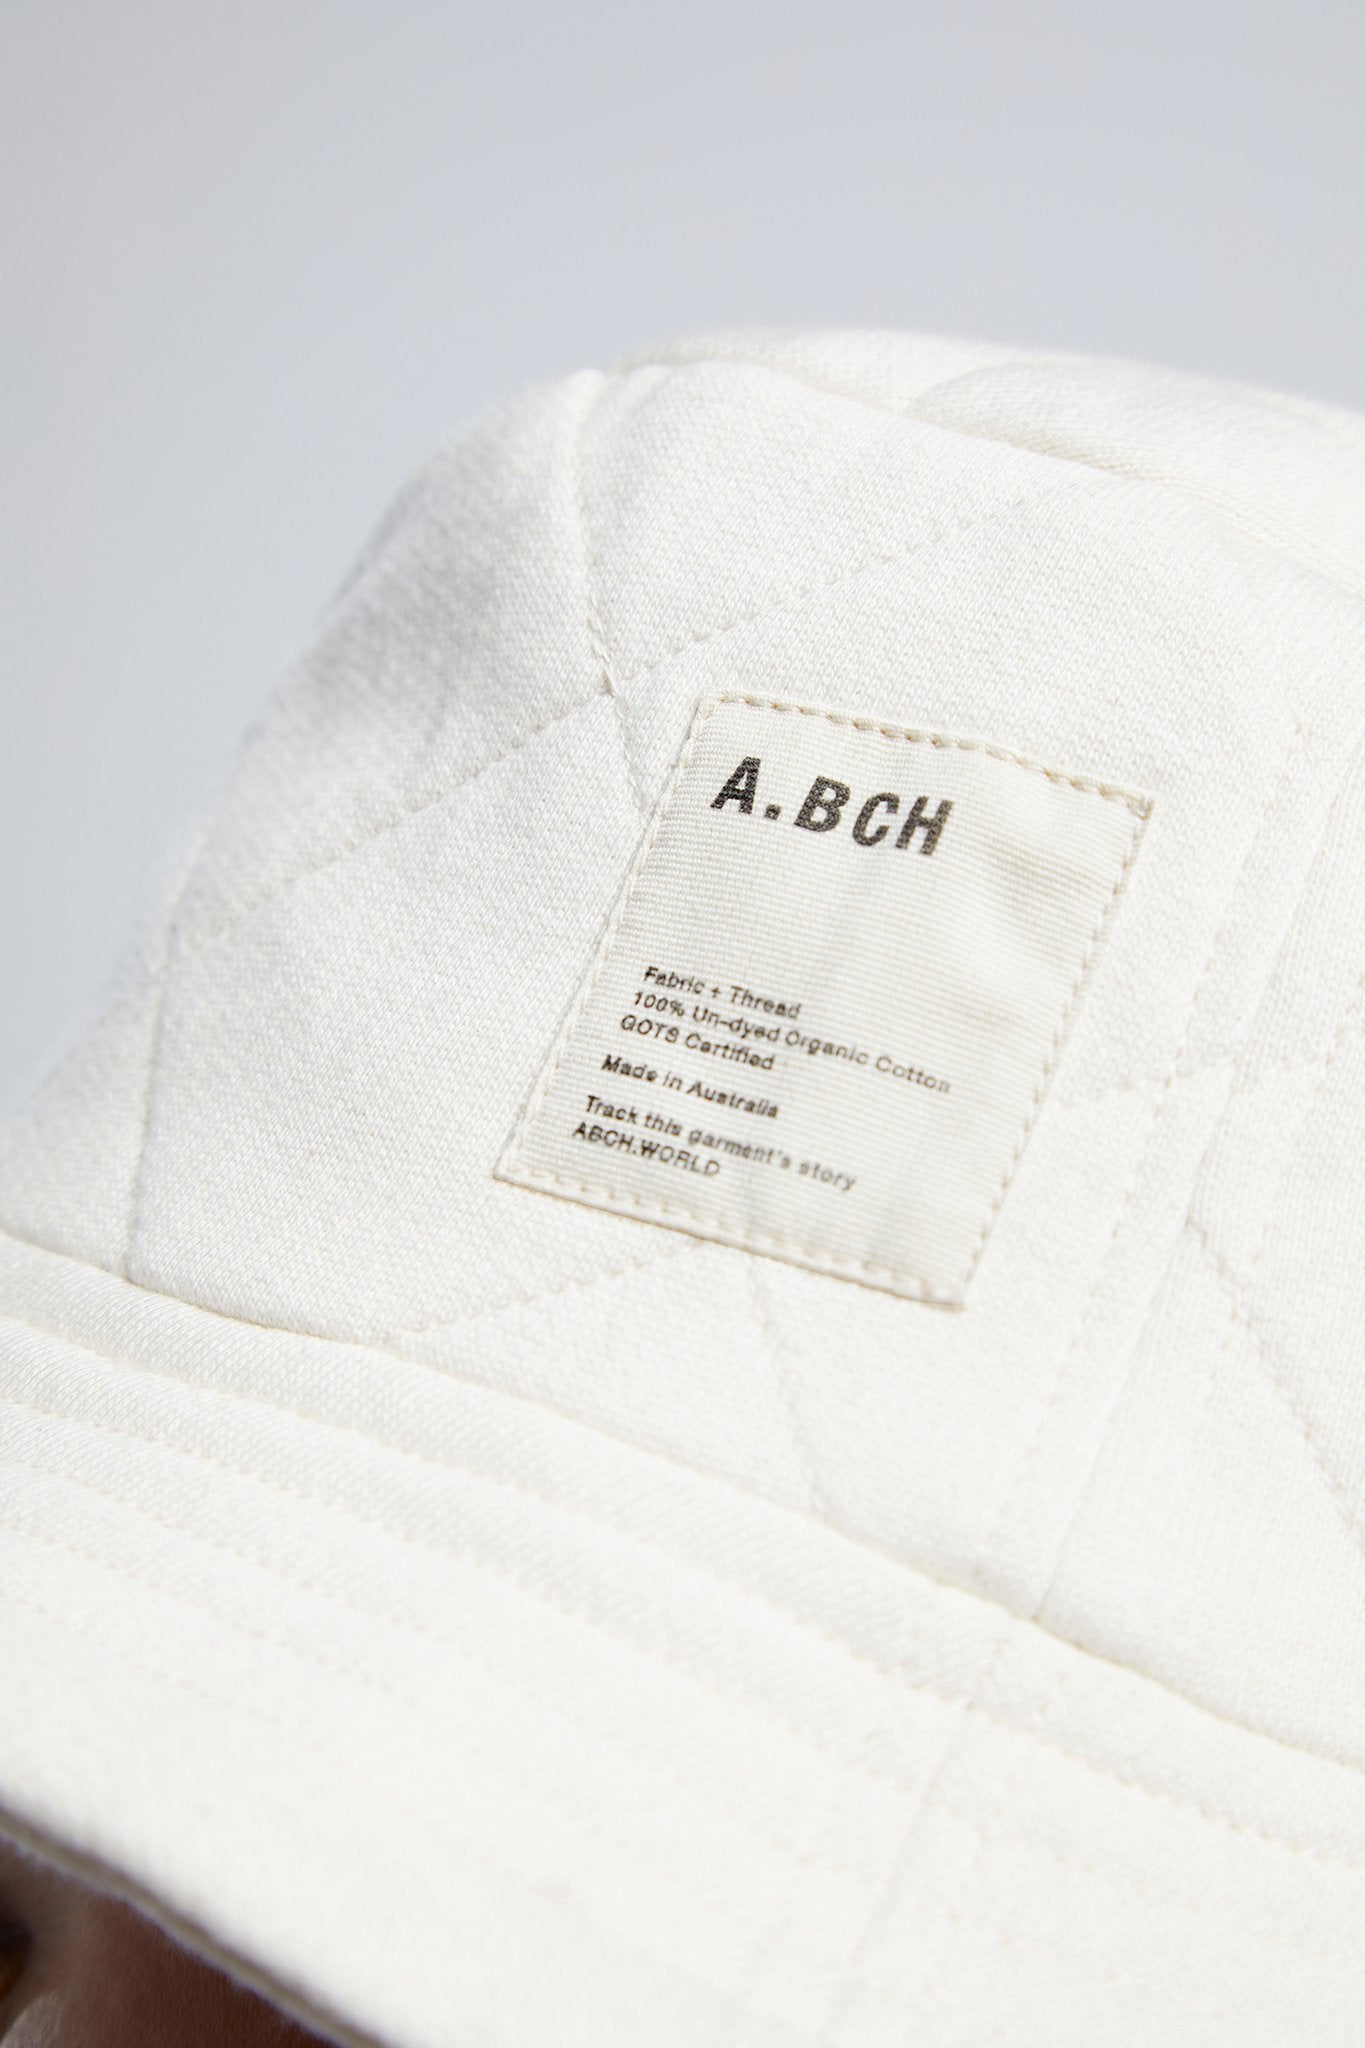 A.QBH Undyed in Organic Cotton Offcuts